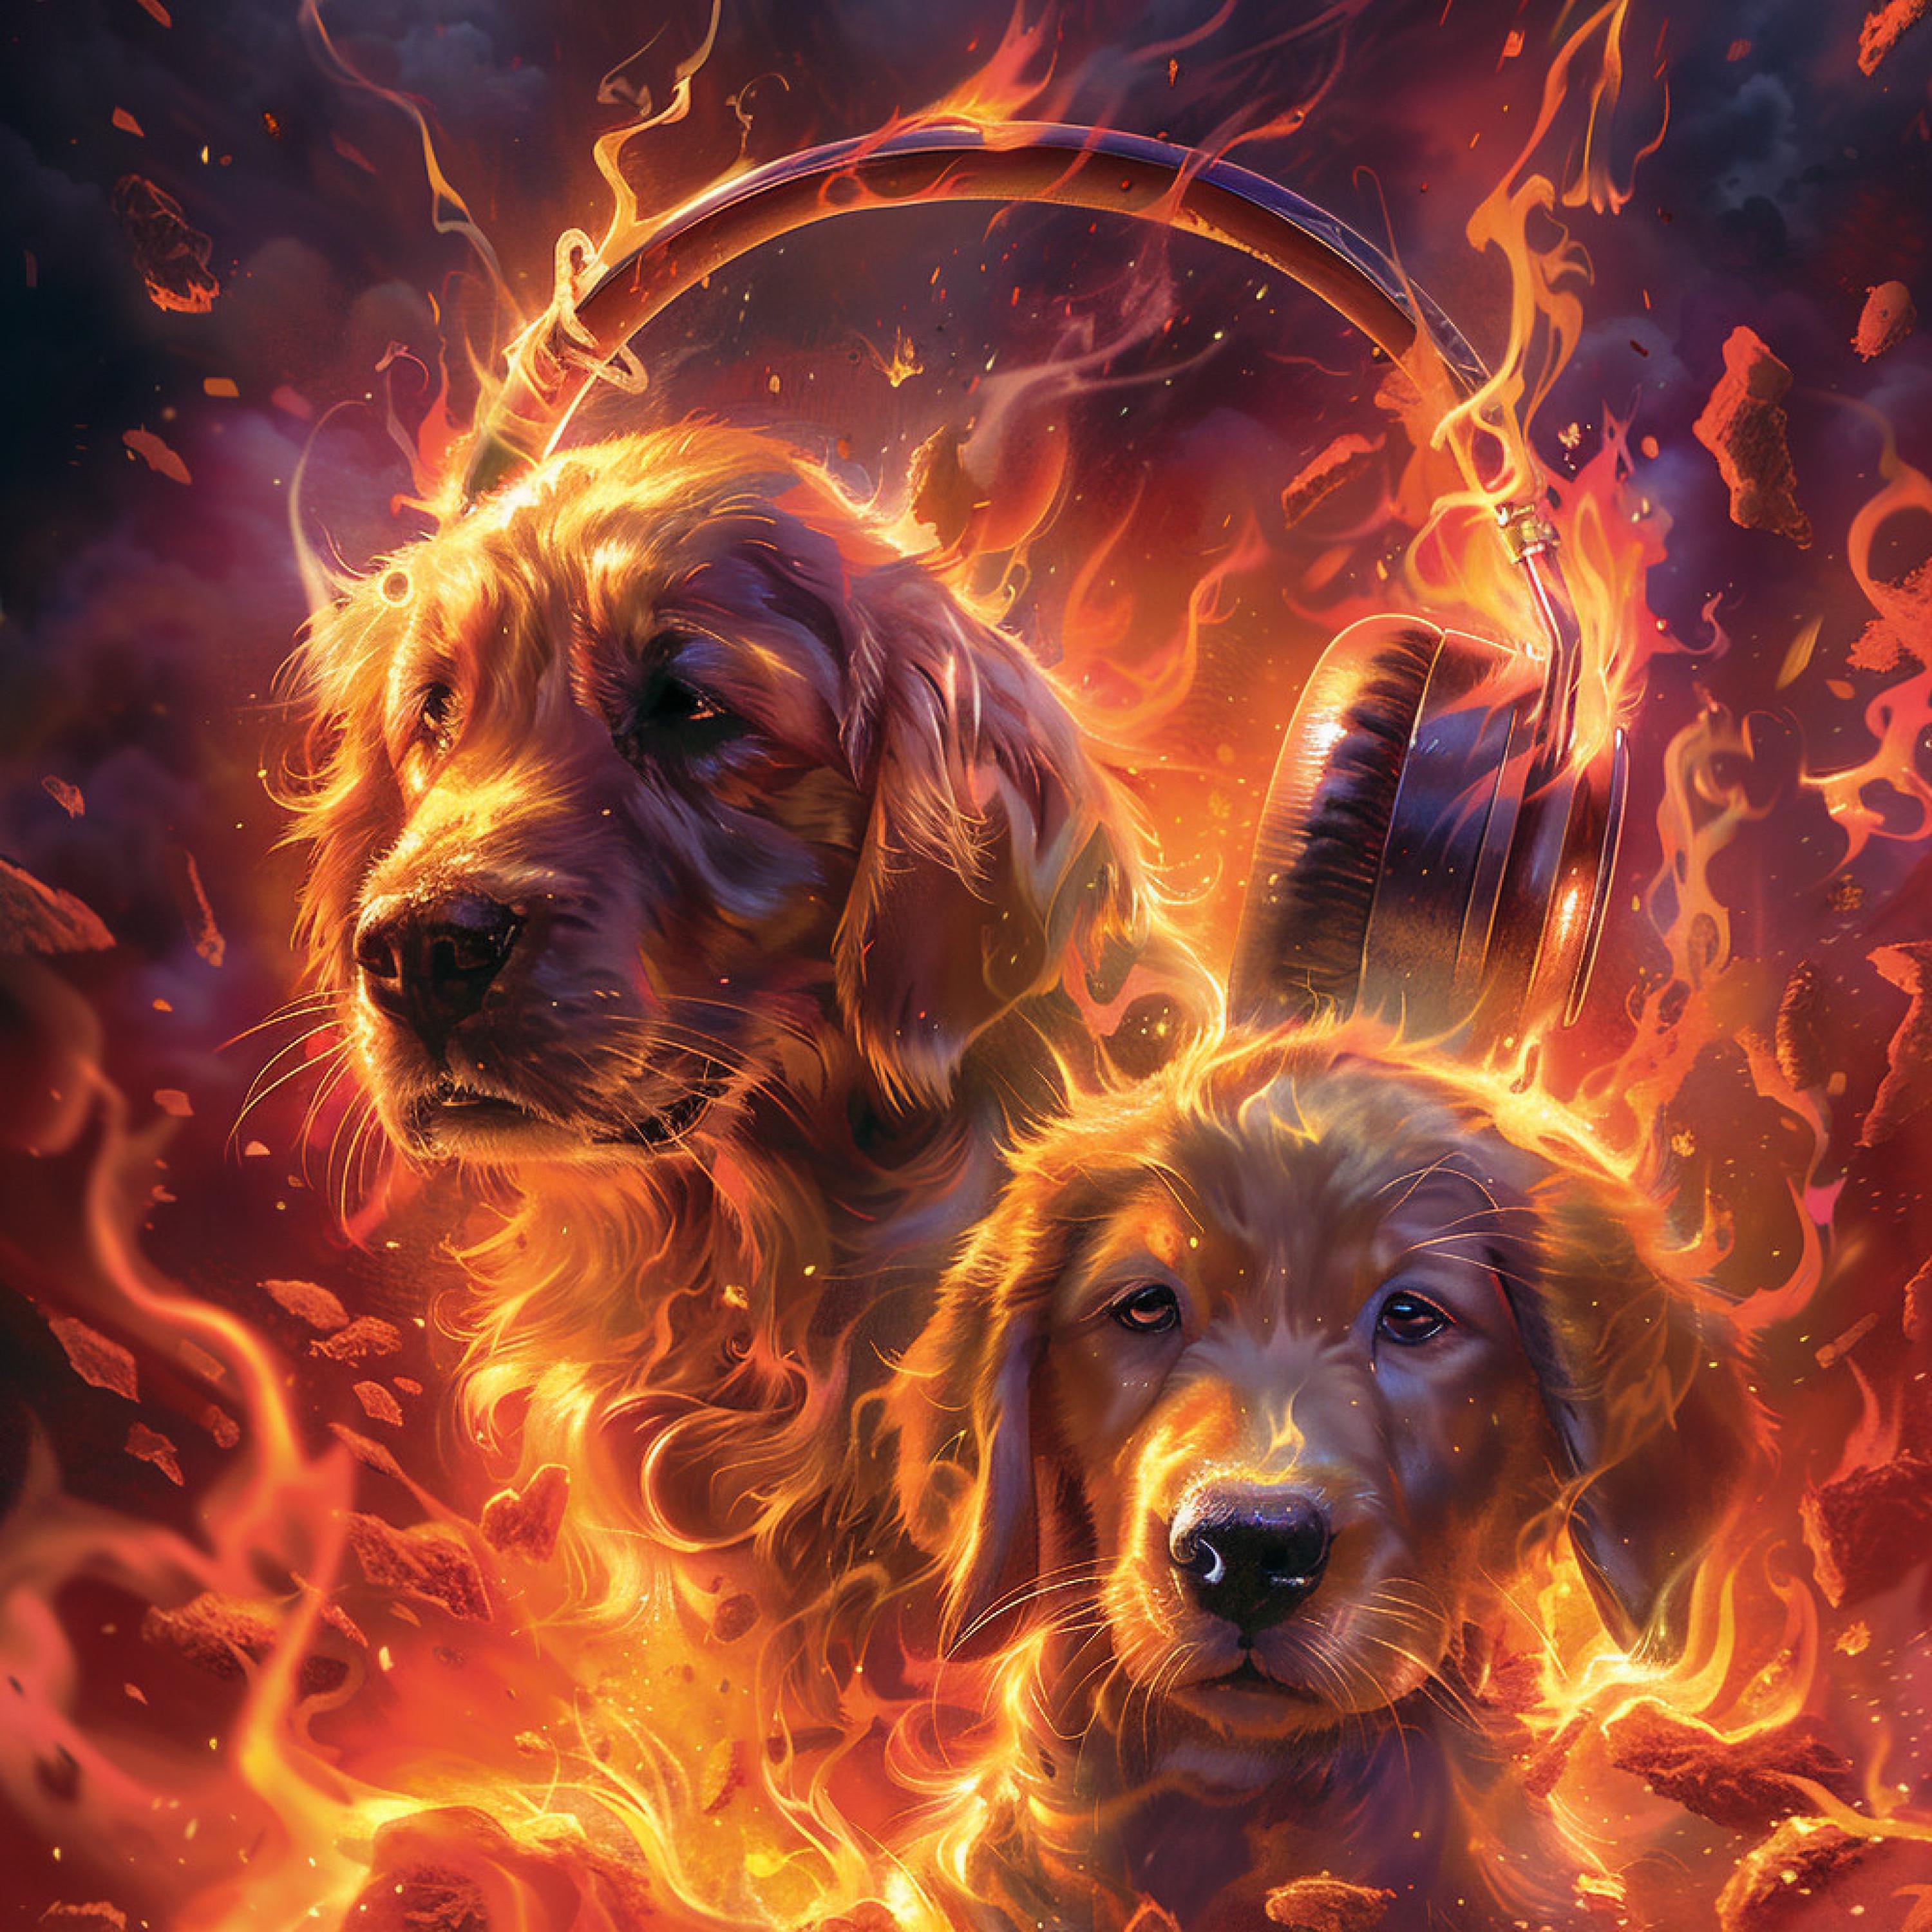 Music For Your Dog - Dogs Play by Fire's Light